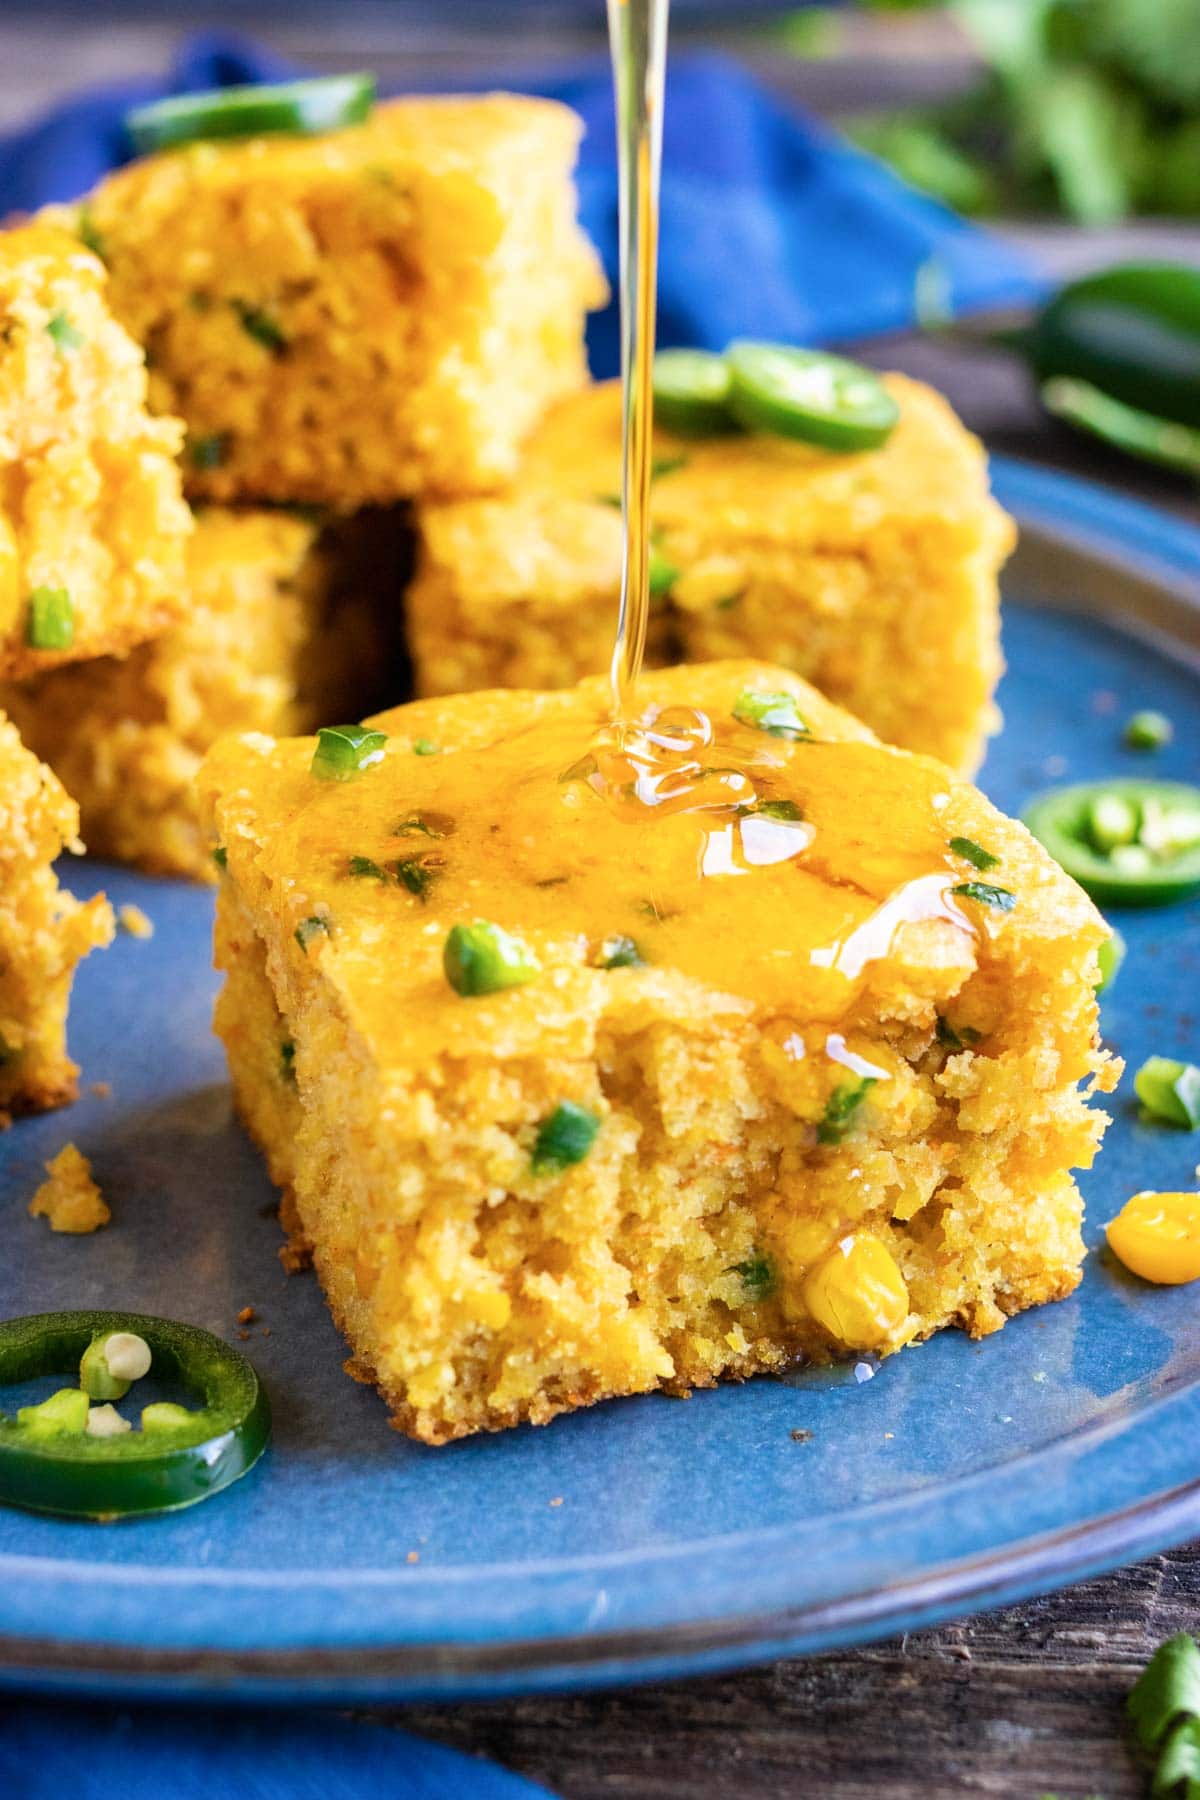 A drizzle of honey being poured on a piece of jalapeño cornbread.